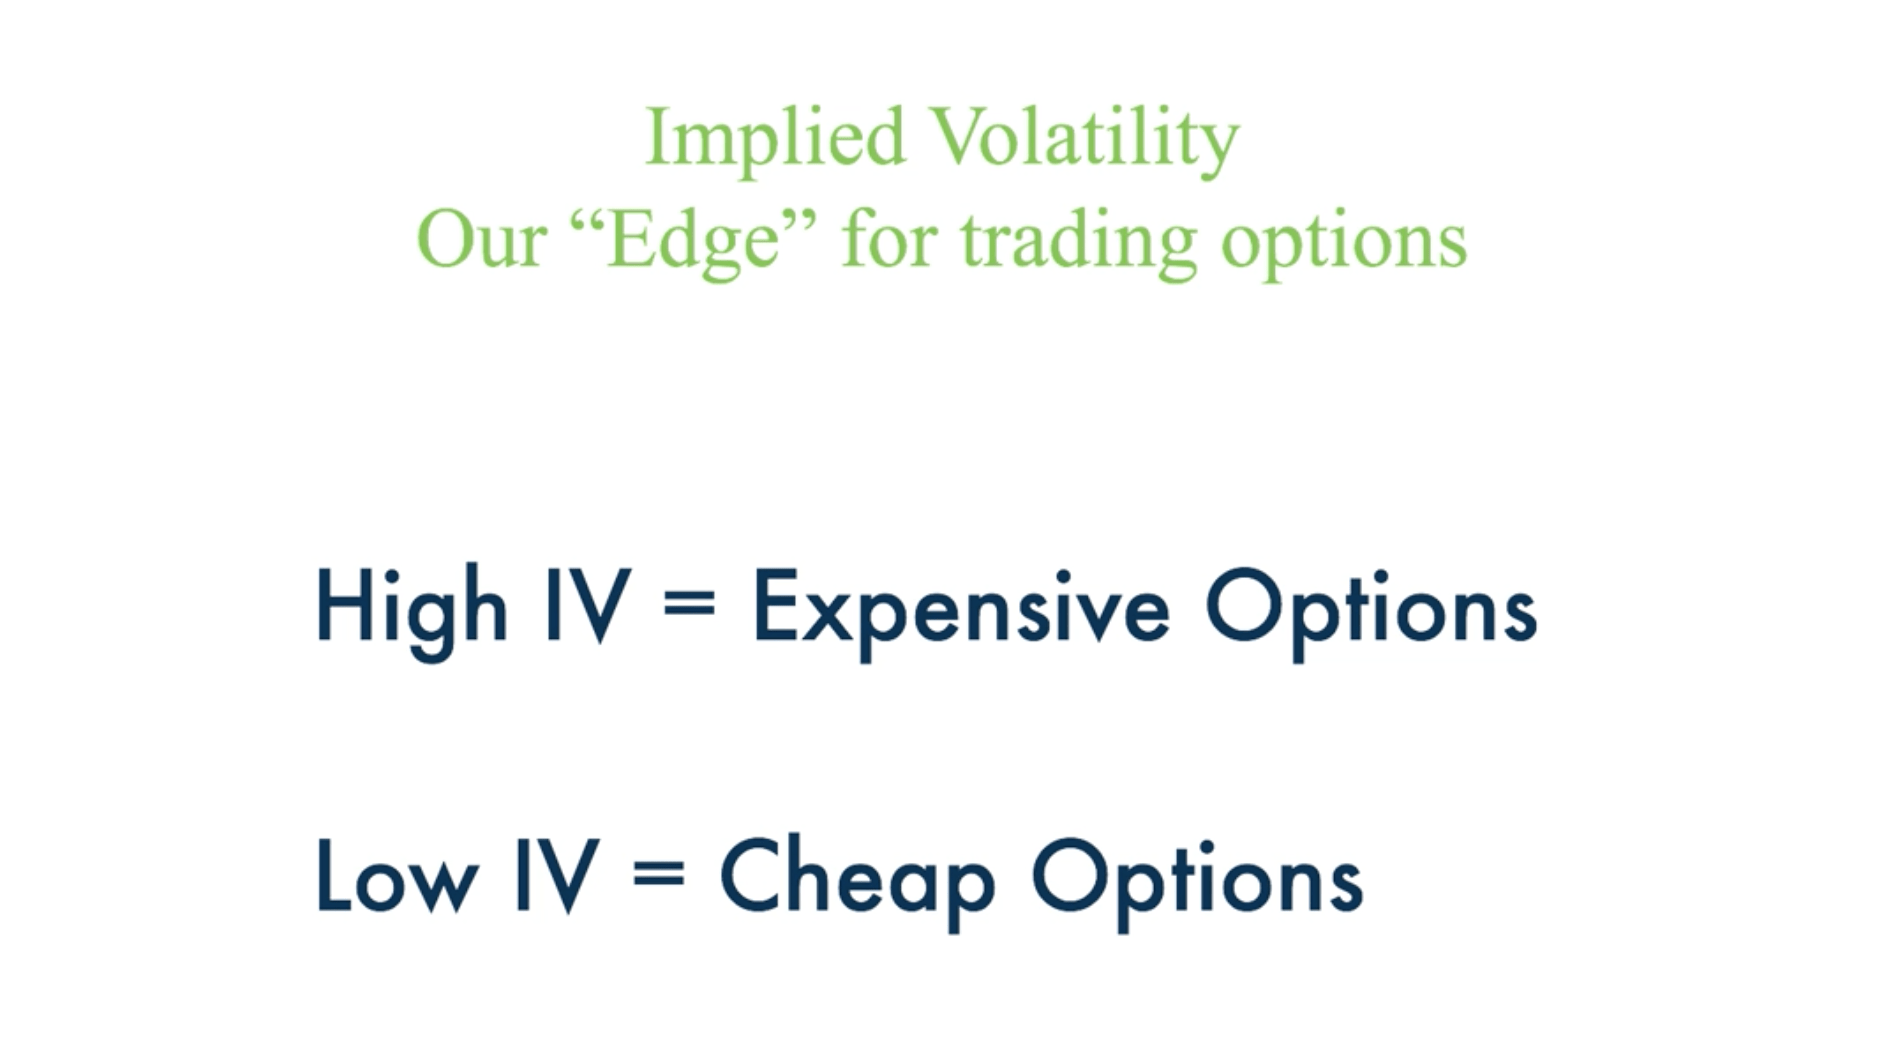 High IV = Expensive Options Low IV = Cheap Options